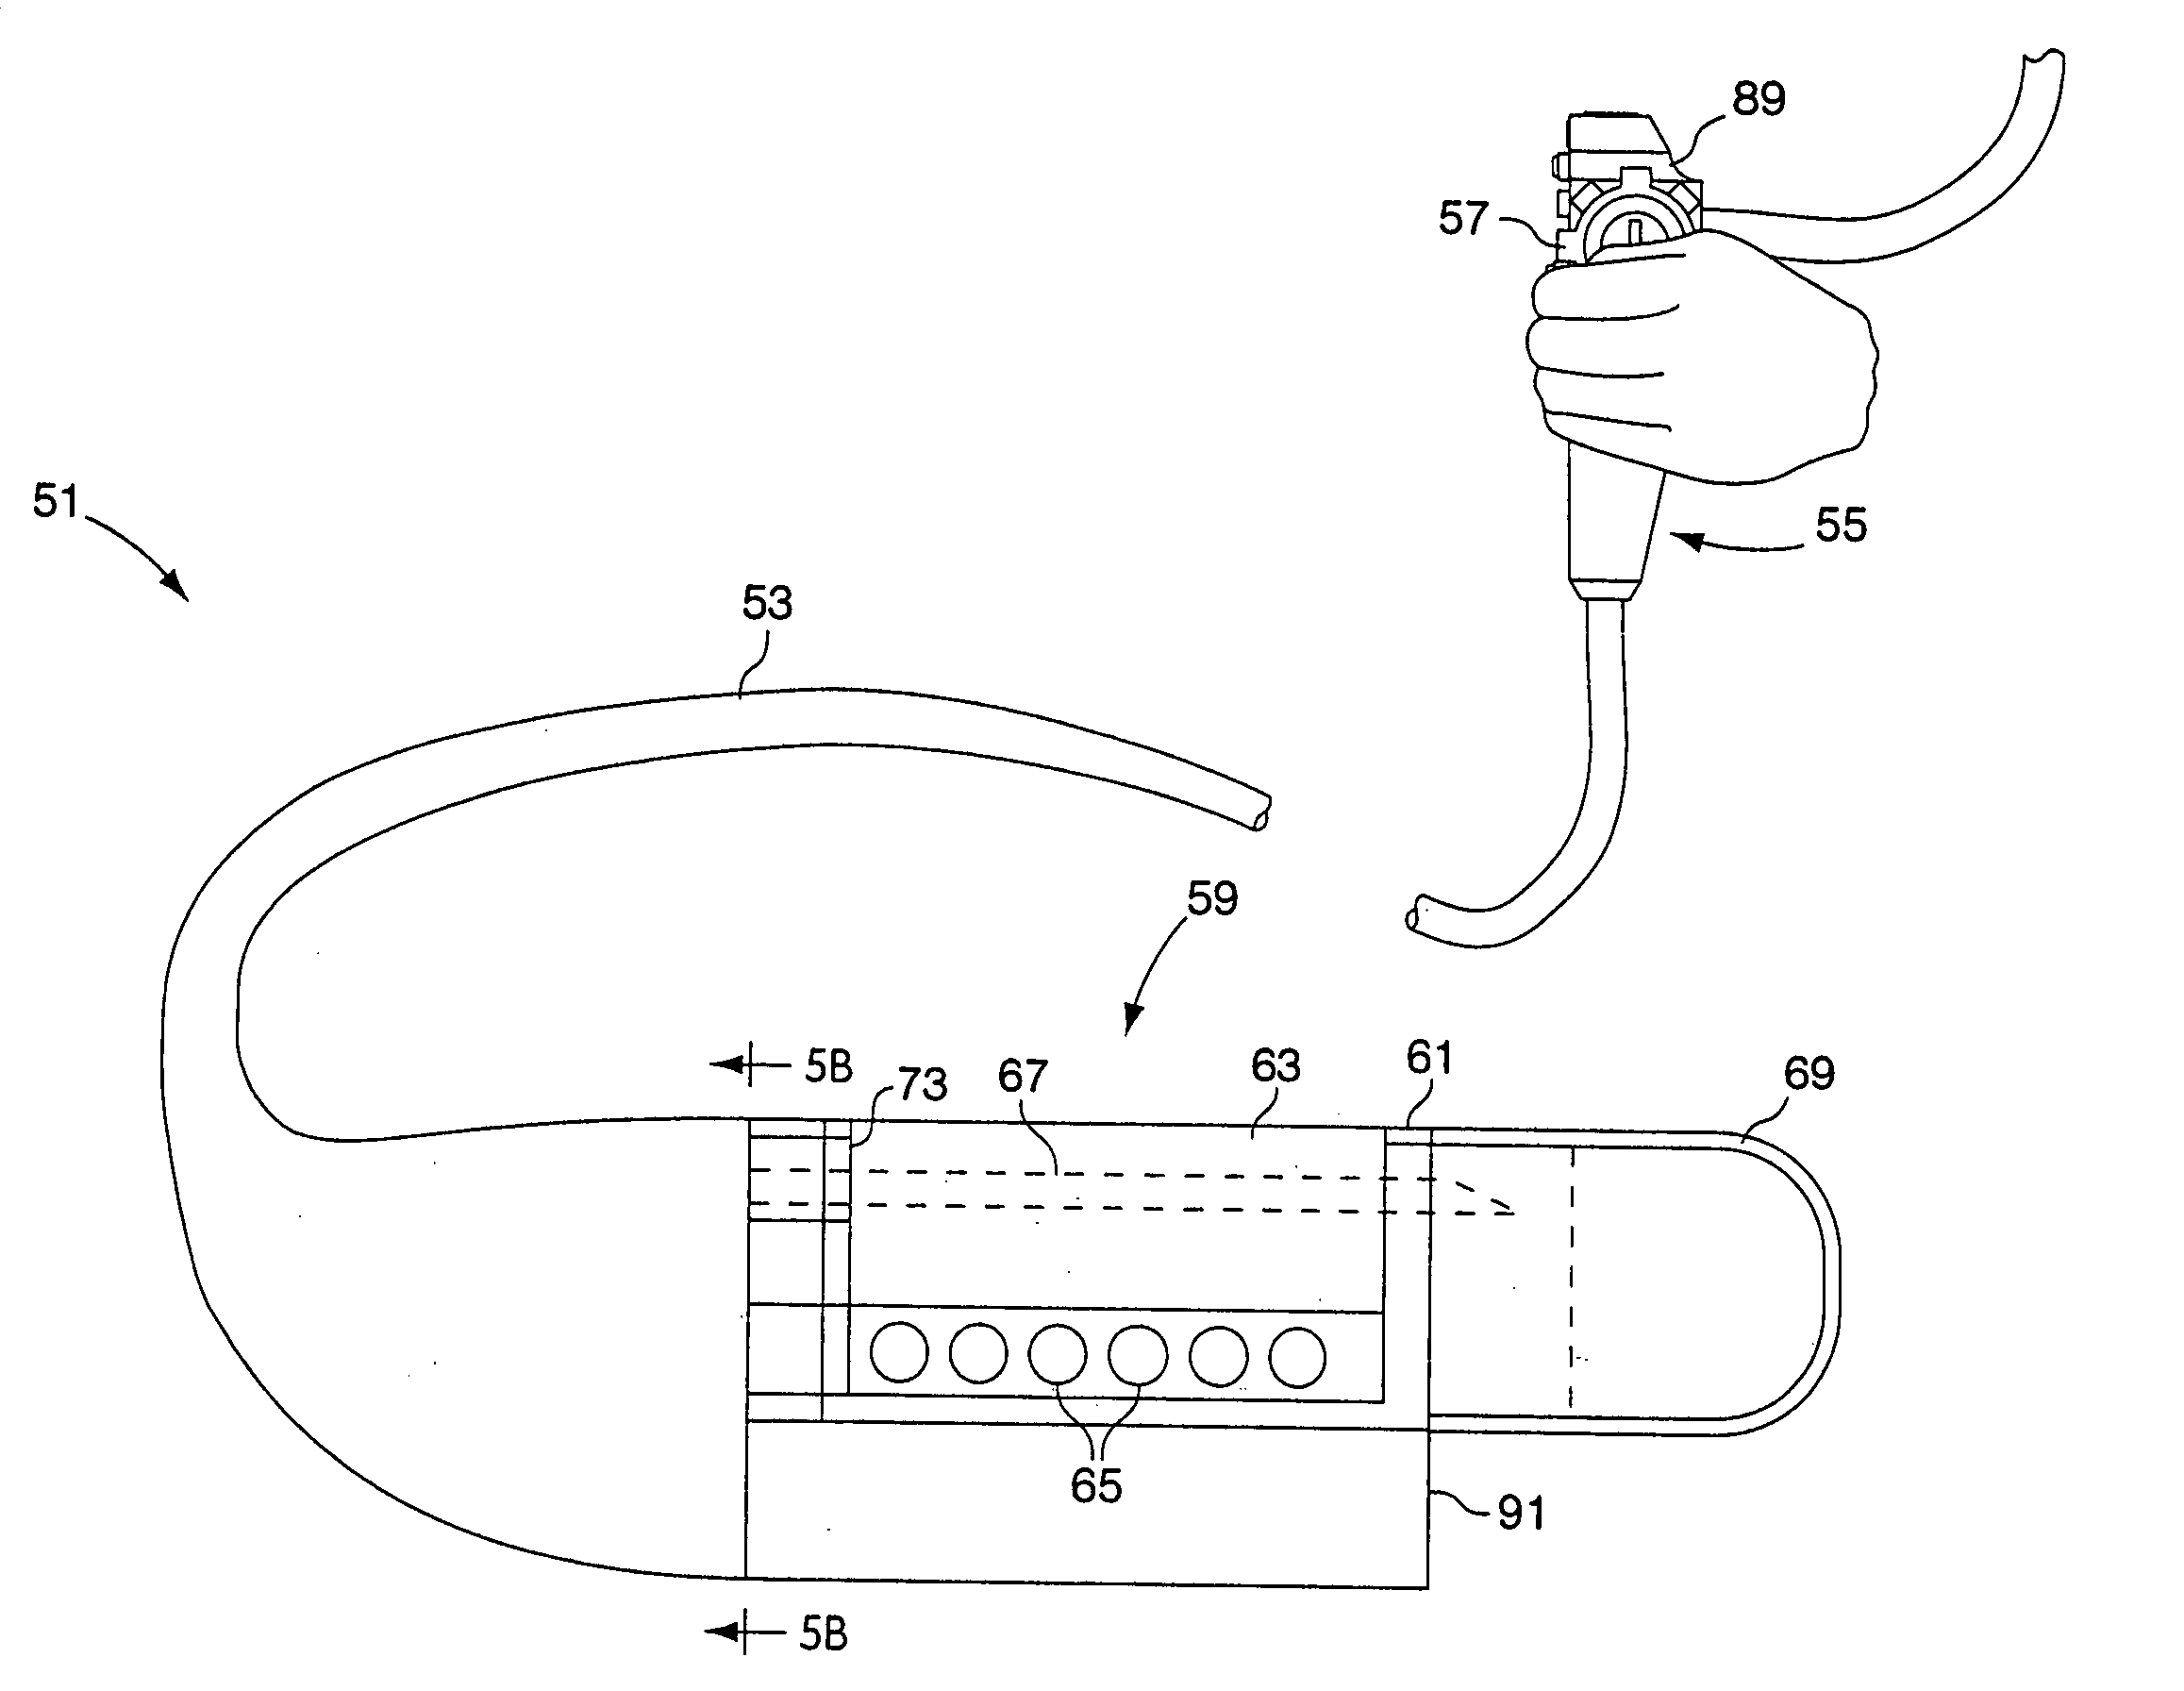 Integrated endoscope and accessory treament device